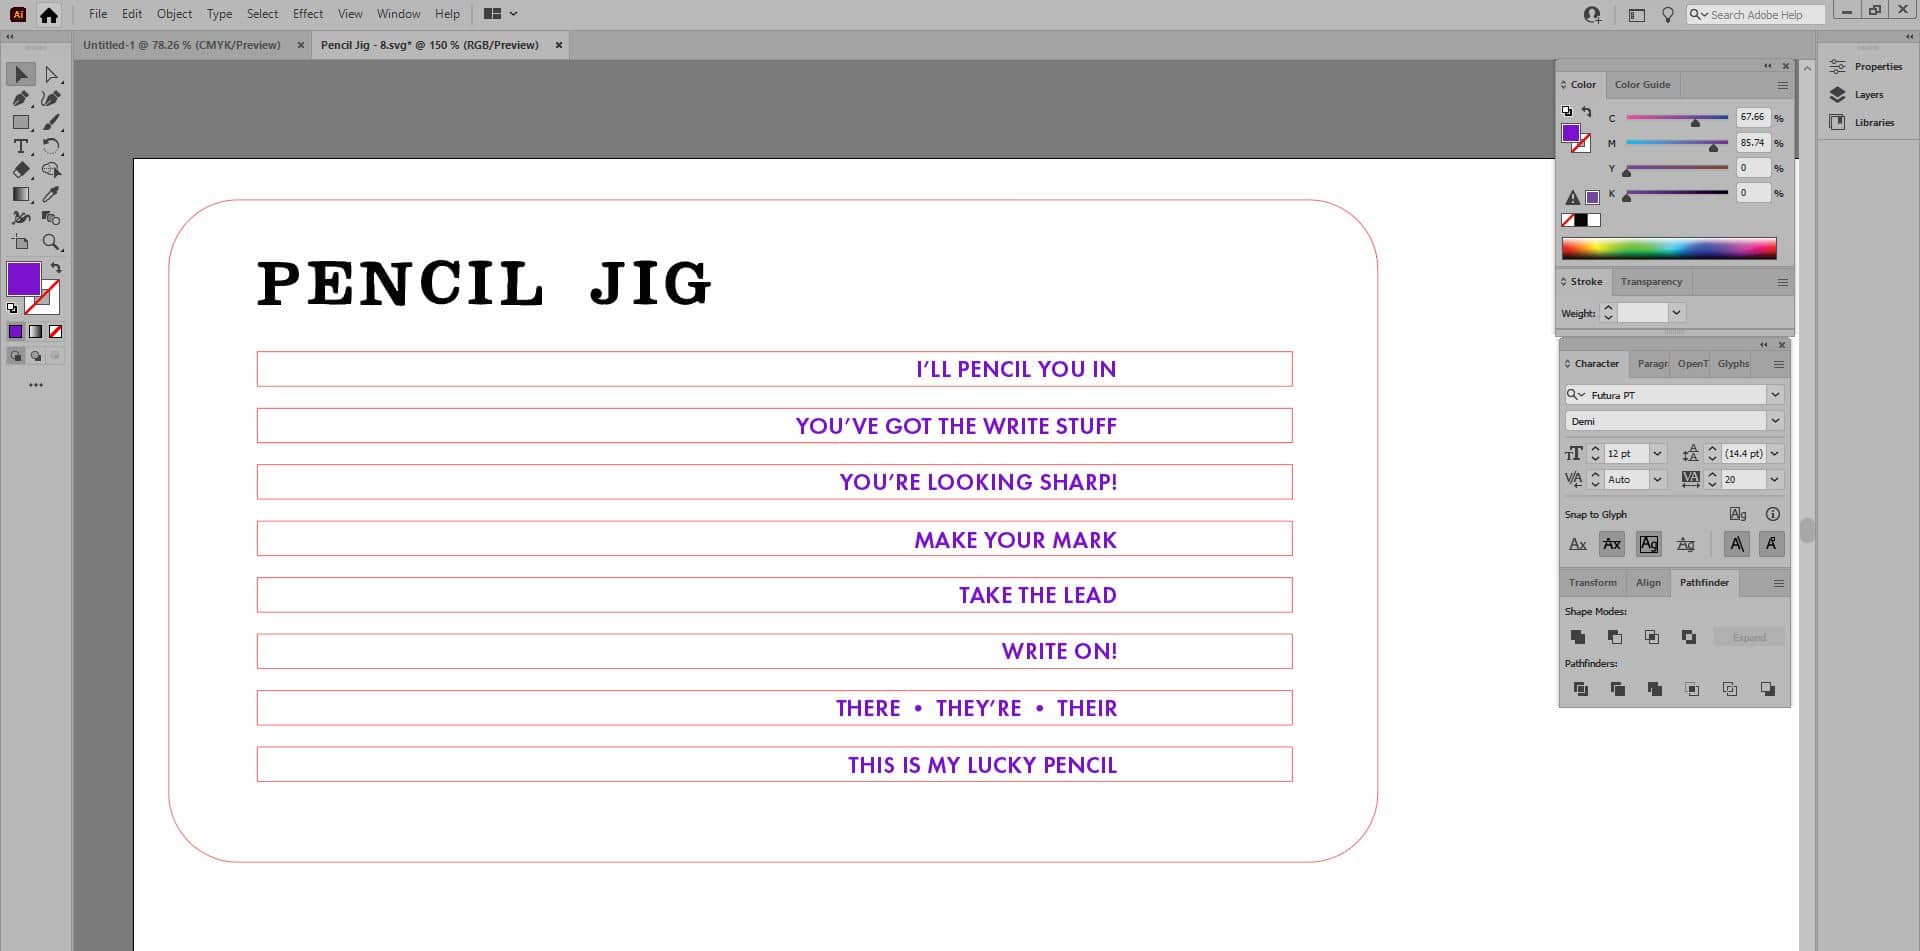 Screenshot of Adobe Illustrator software - adding text to a pencil jig